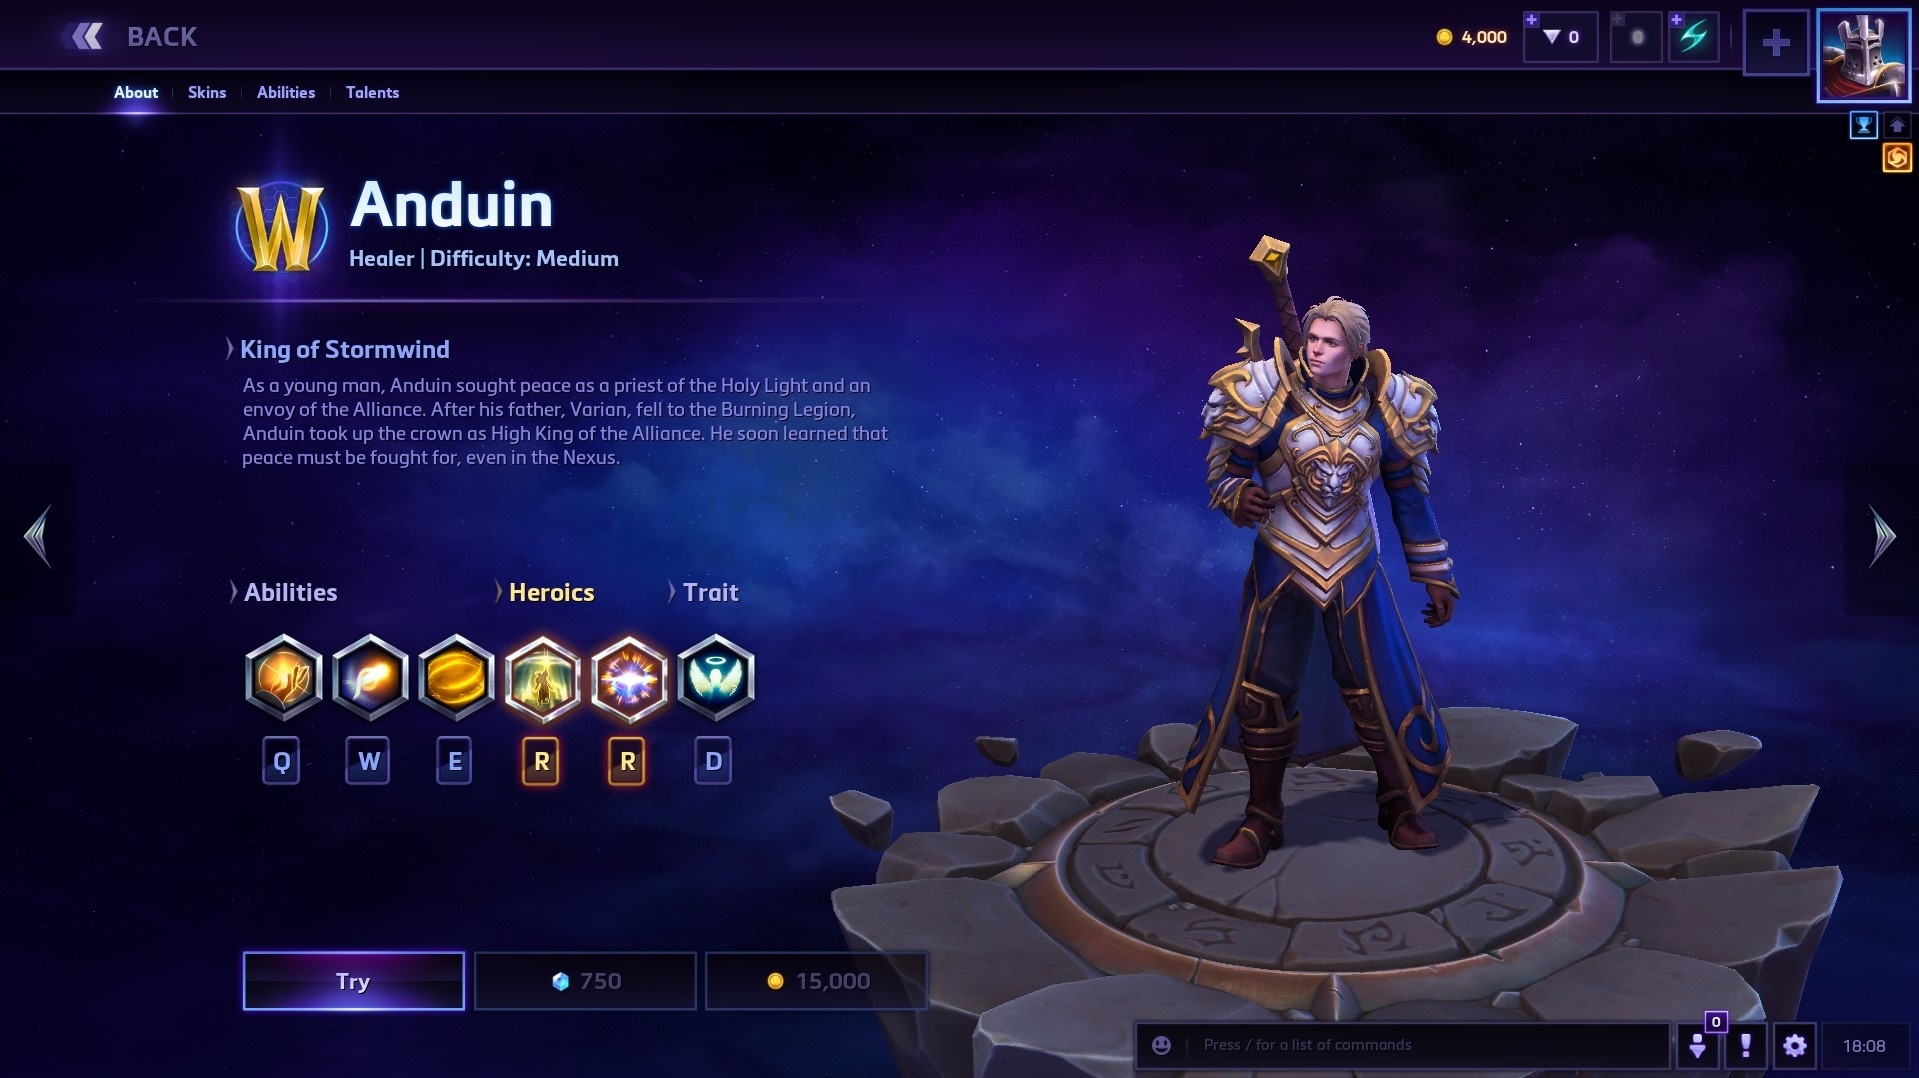 Varian Build Guides :: Heroes of the Storm (HotS) Varian Builds on